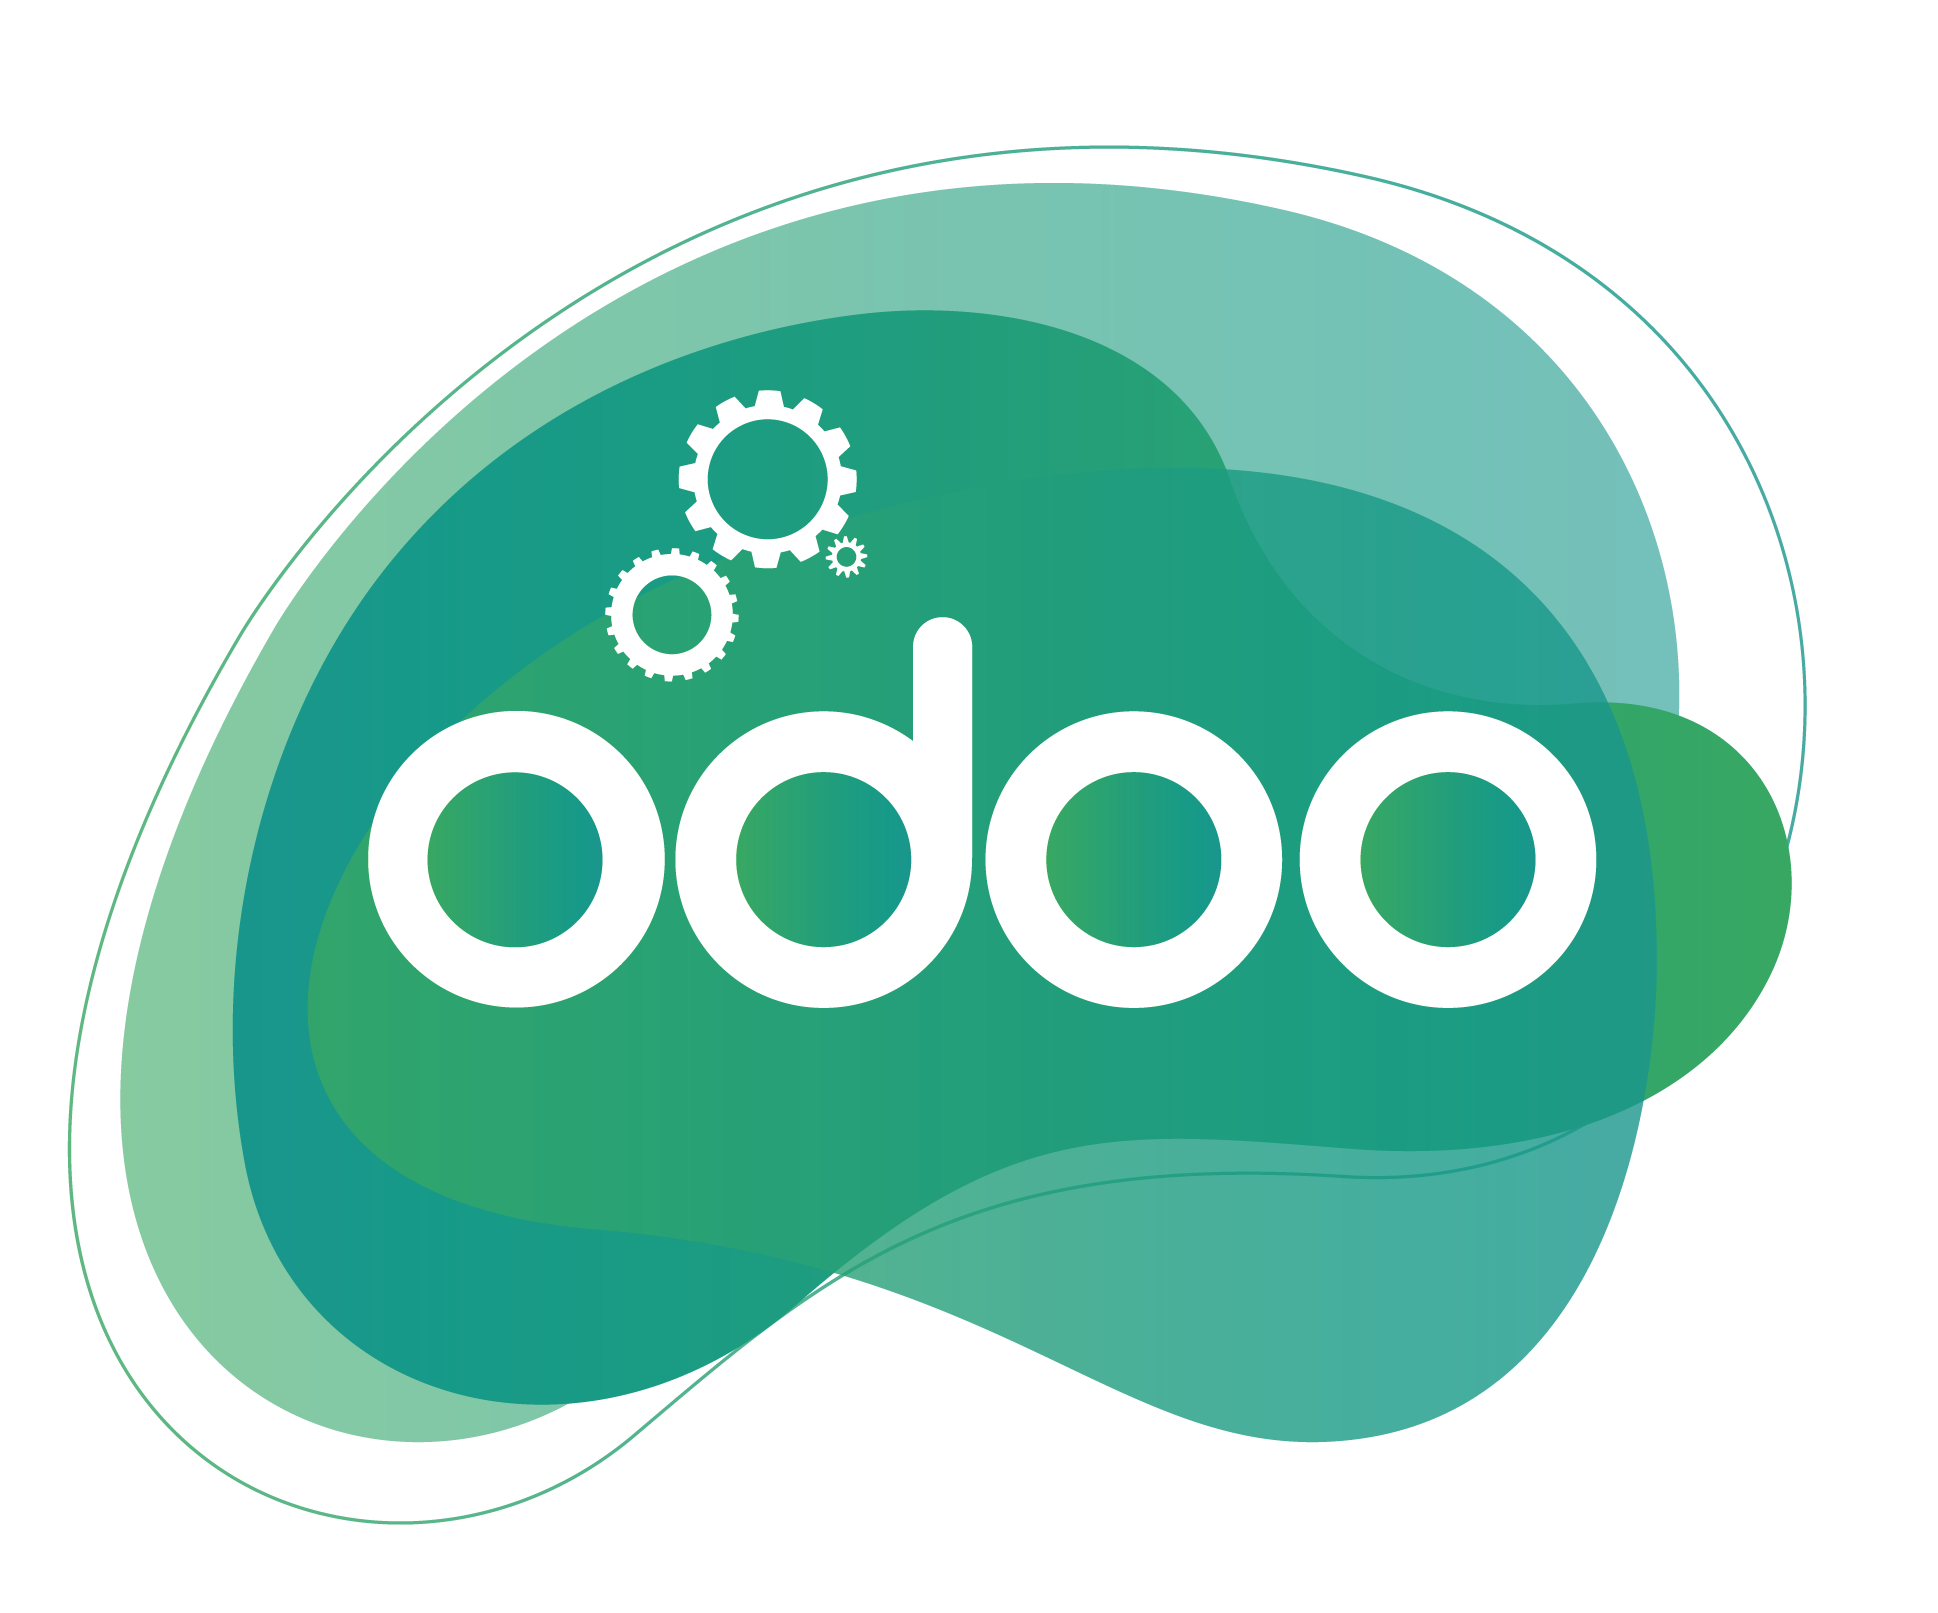 We in-house talented and skilled Odoo developers to build your Odoo modules and customize your Odoo. Our extended team of IT experts makes sure every Odoo modules are built the right way and our customers gain 100% satisfaction from our service.